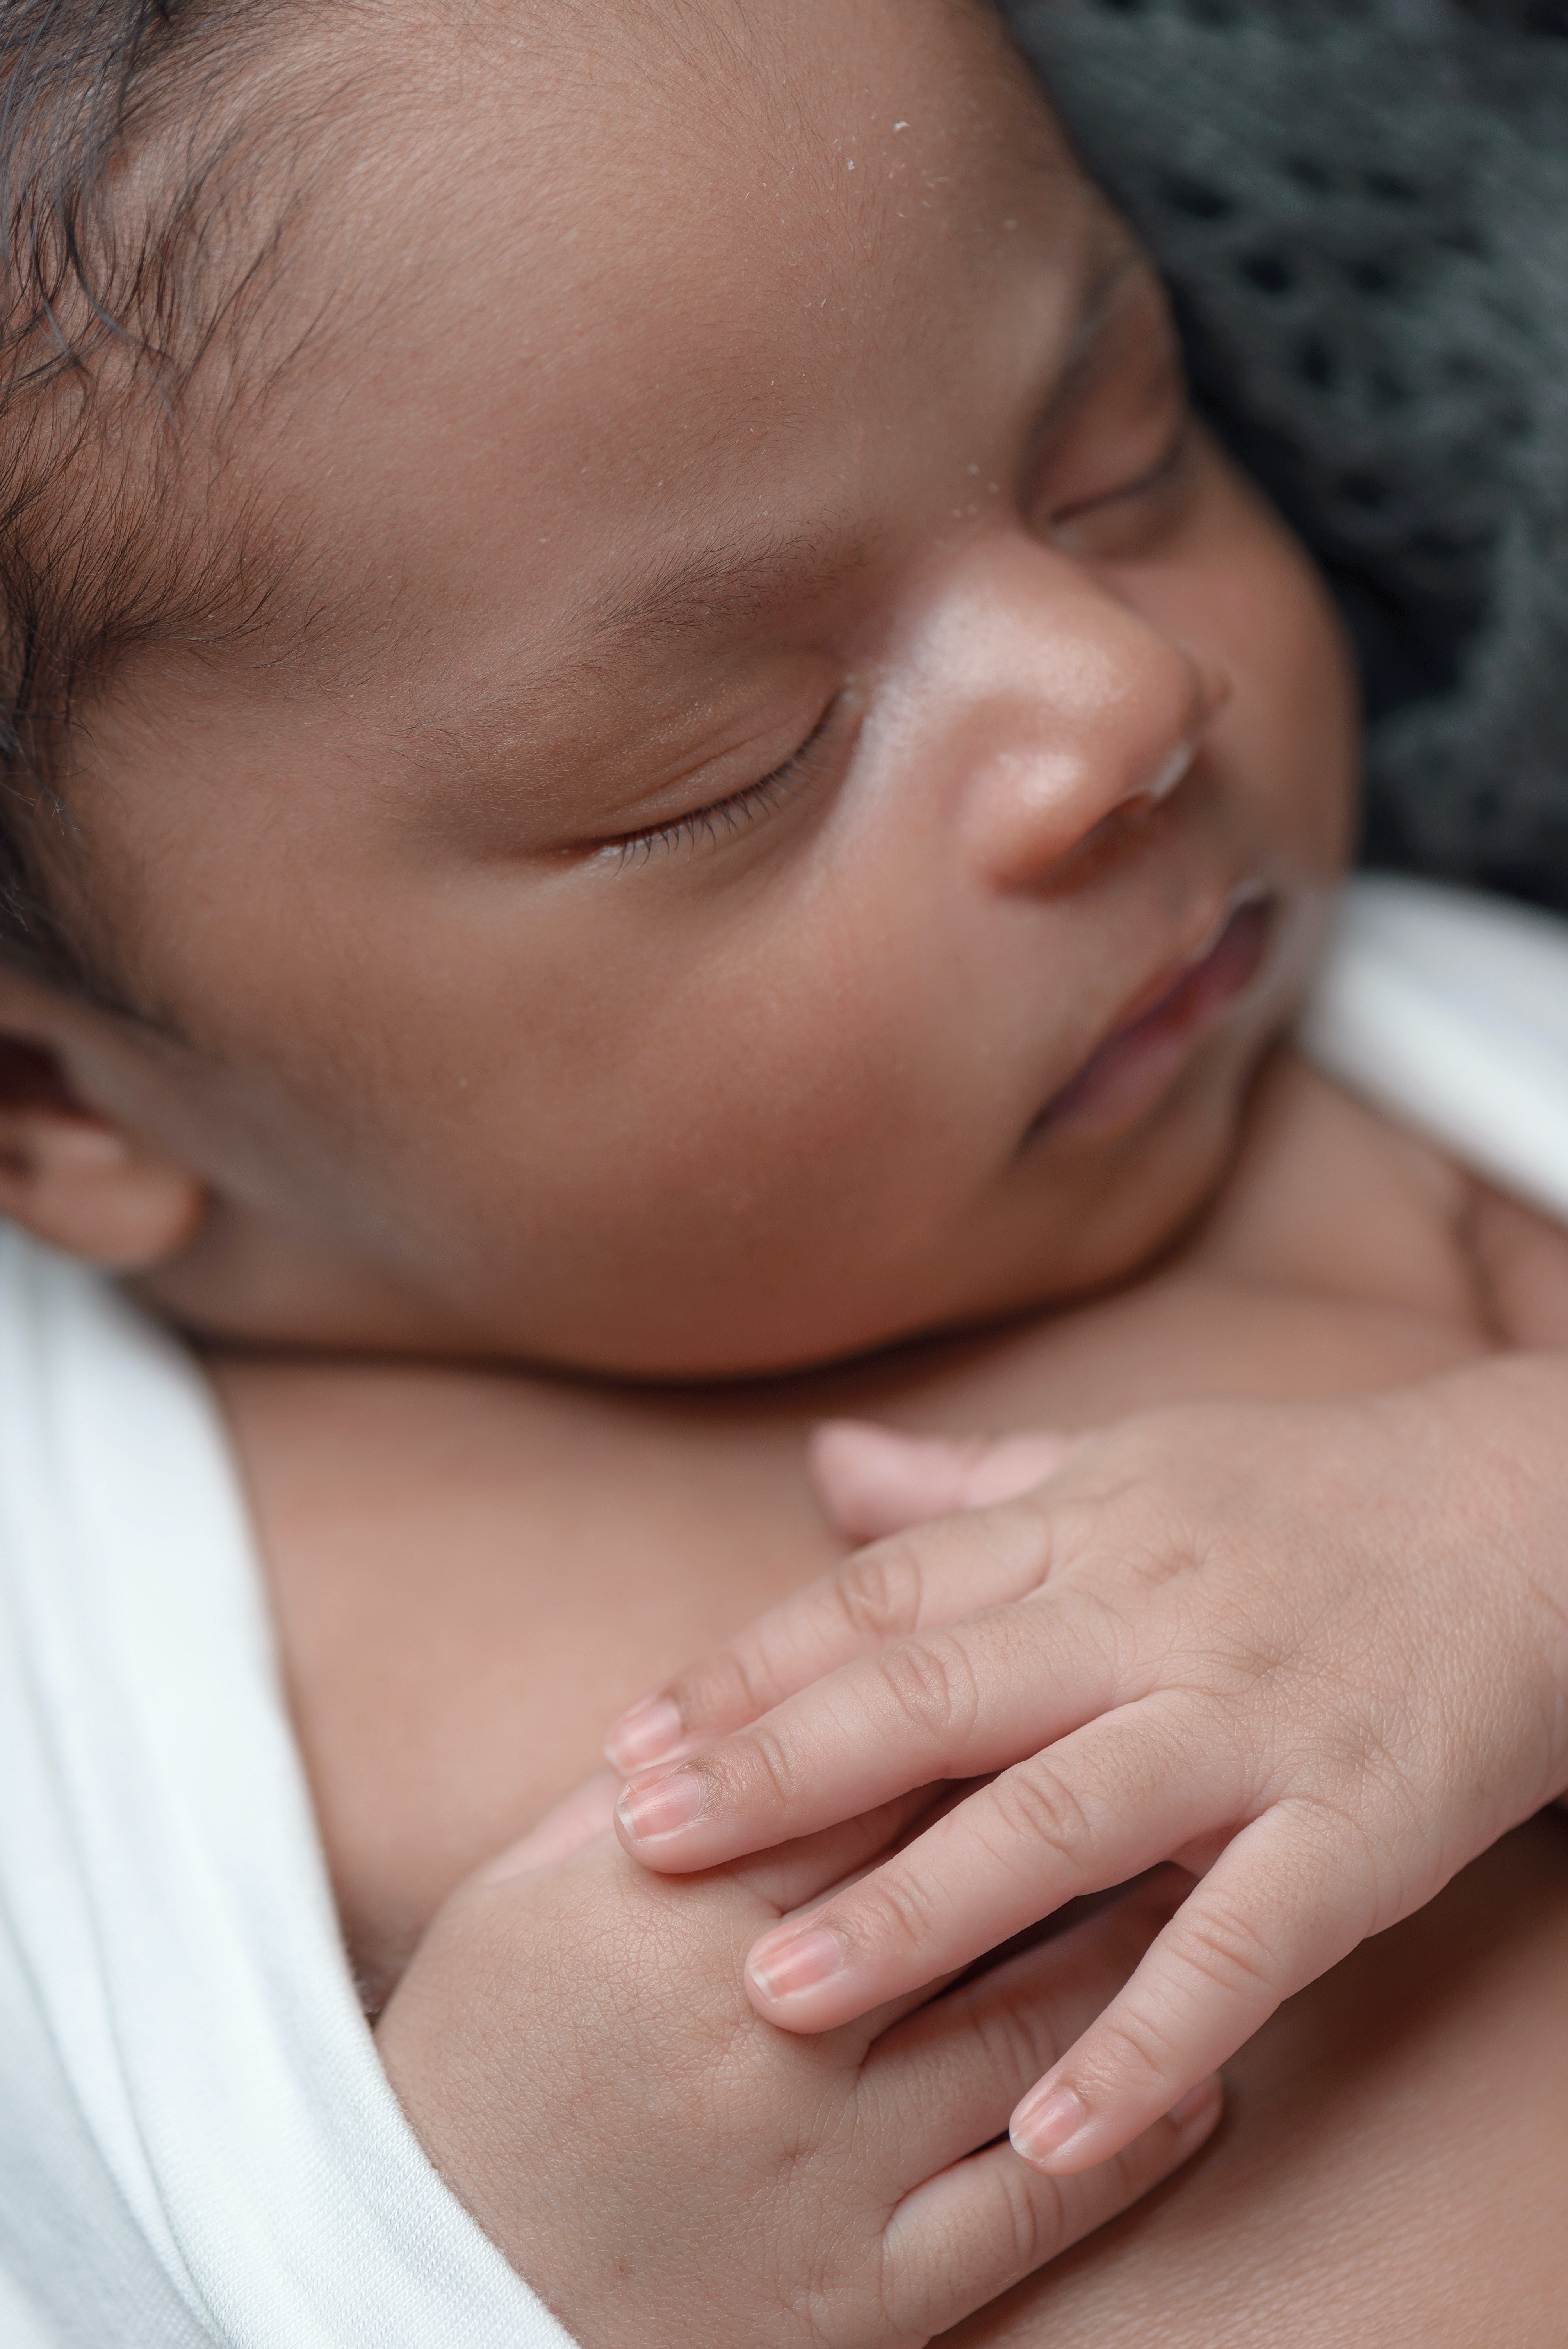 Kevin found a baby inside a box | Photo: Pexels